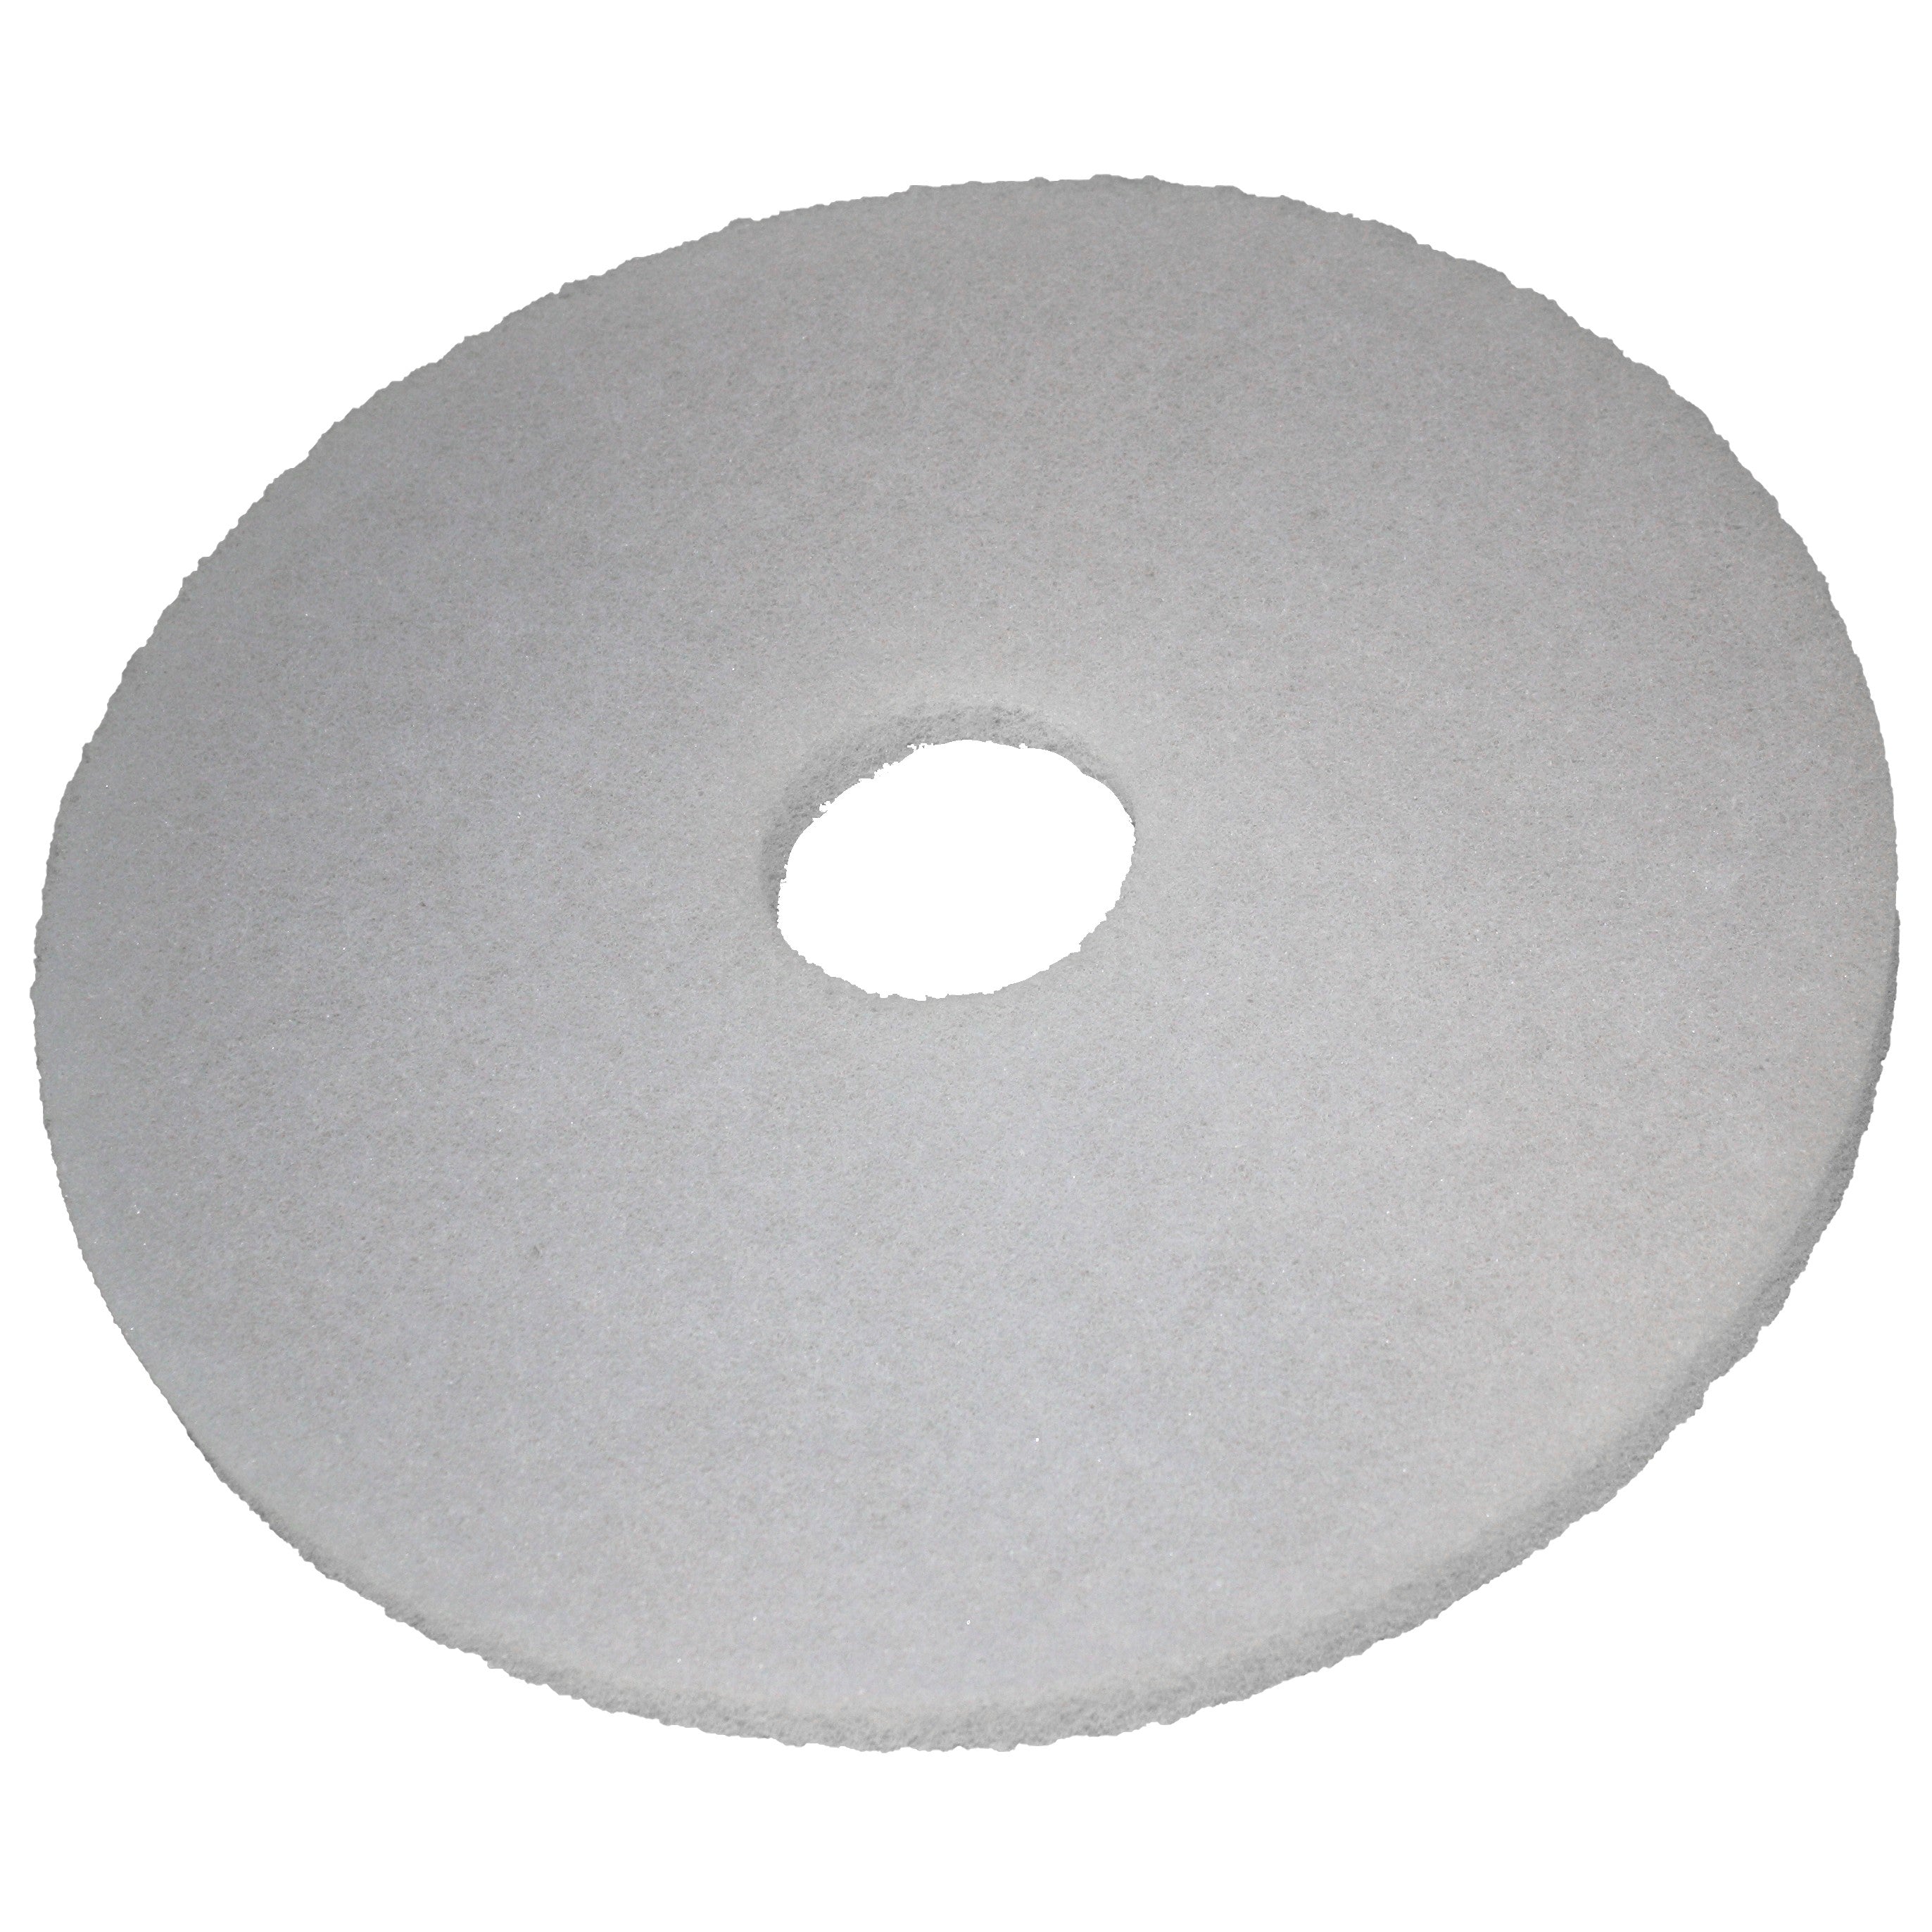 Pad weiss, Ø 305 mm, Polyester